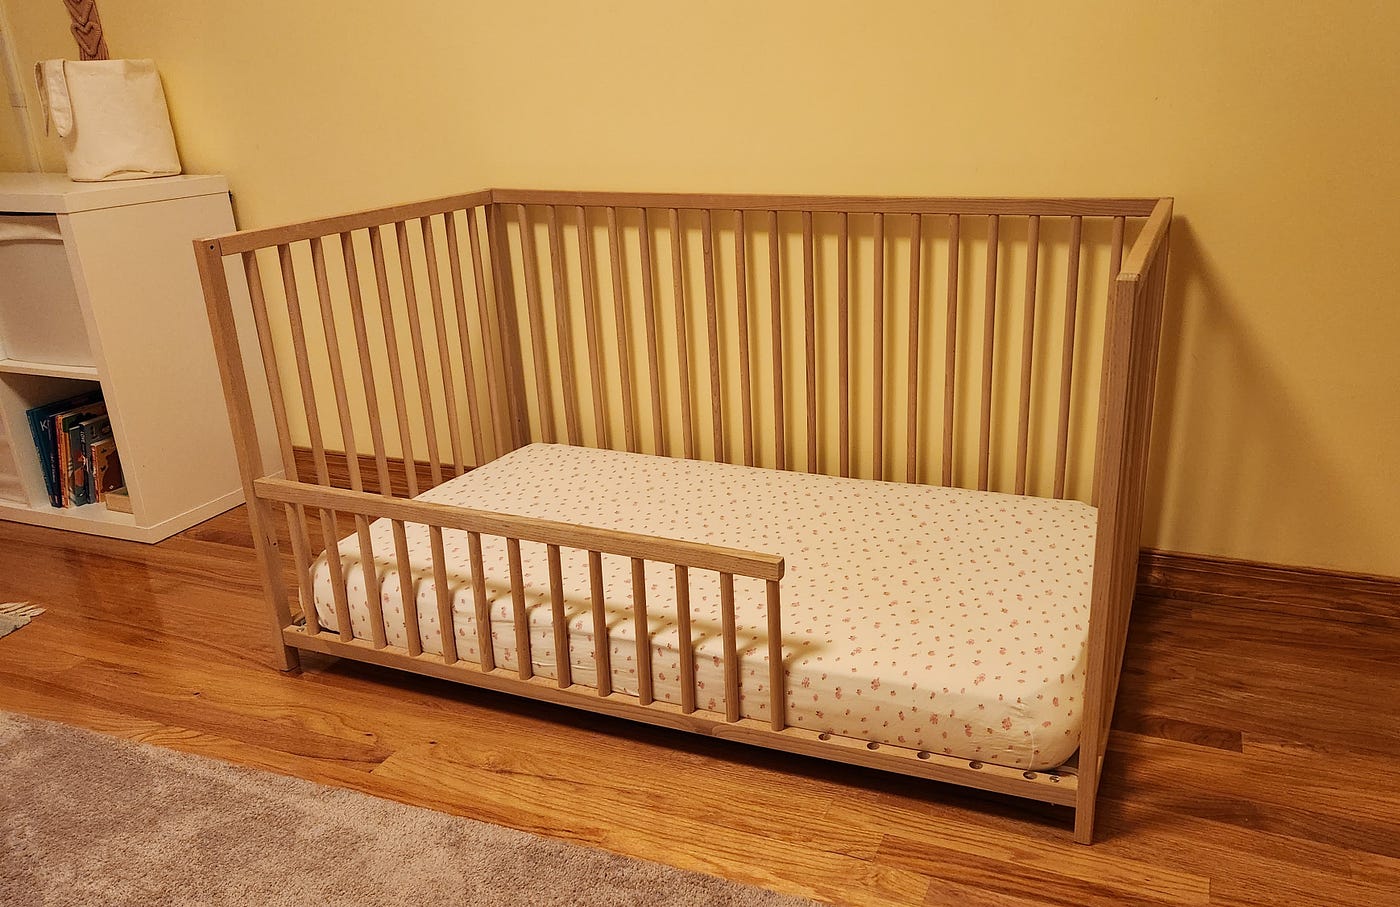 IKEA Sniglar Crib Hack: Convert Your Crib into a Toddler Bed with a Railing  | by The Josh Speaks | Medium